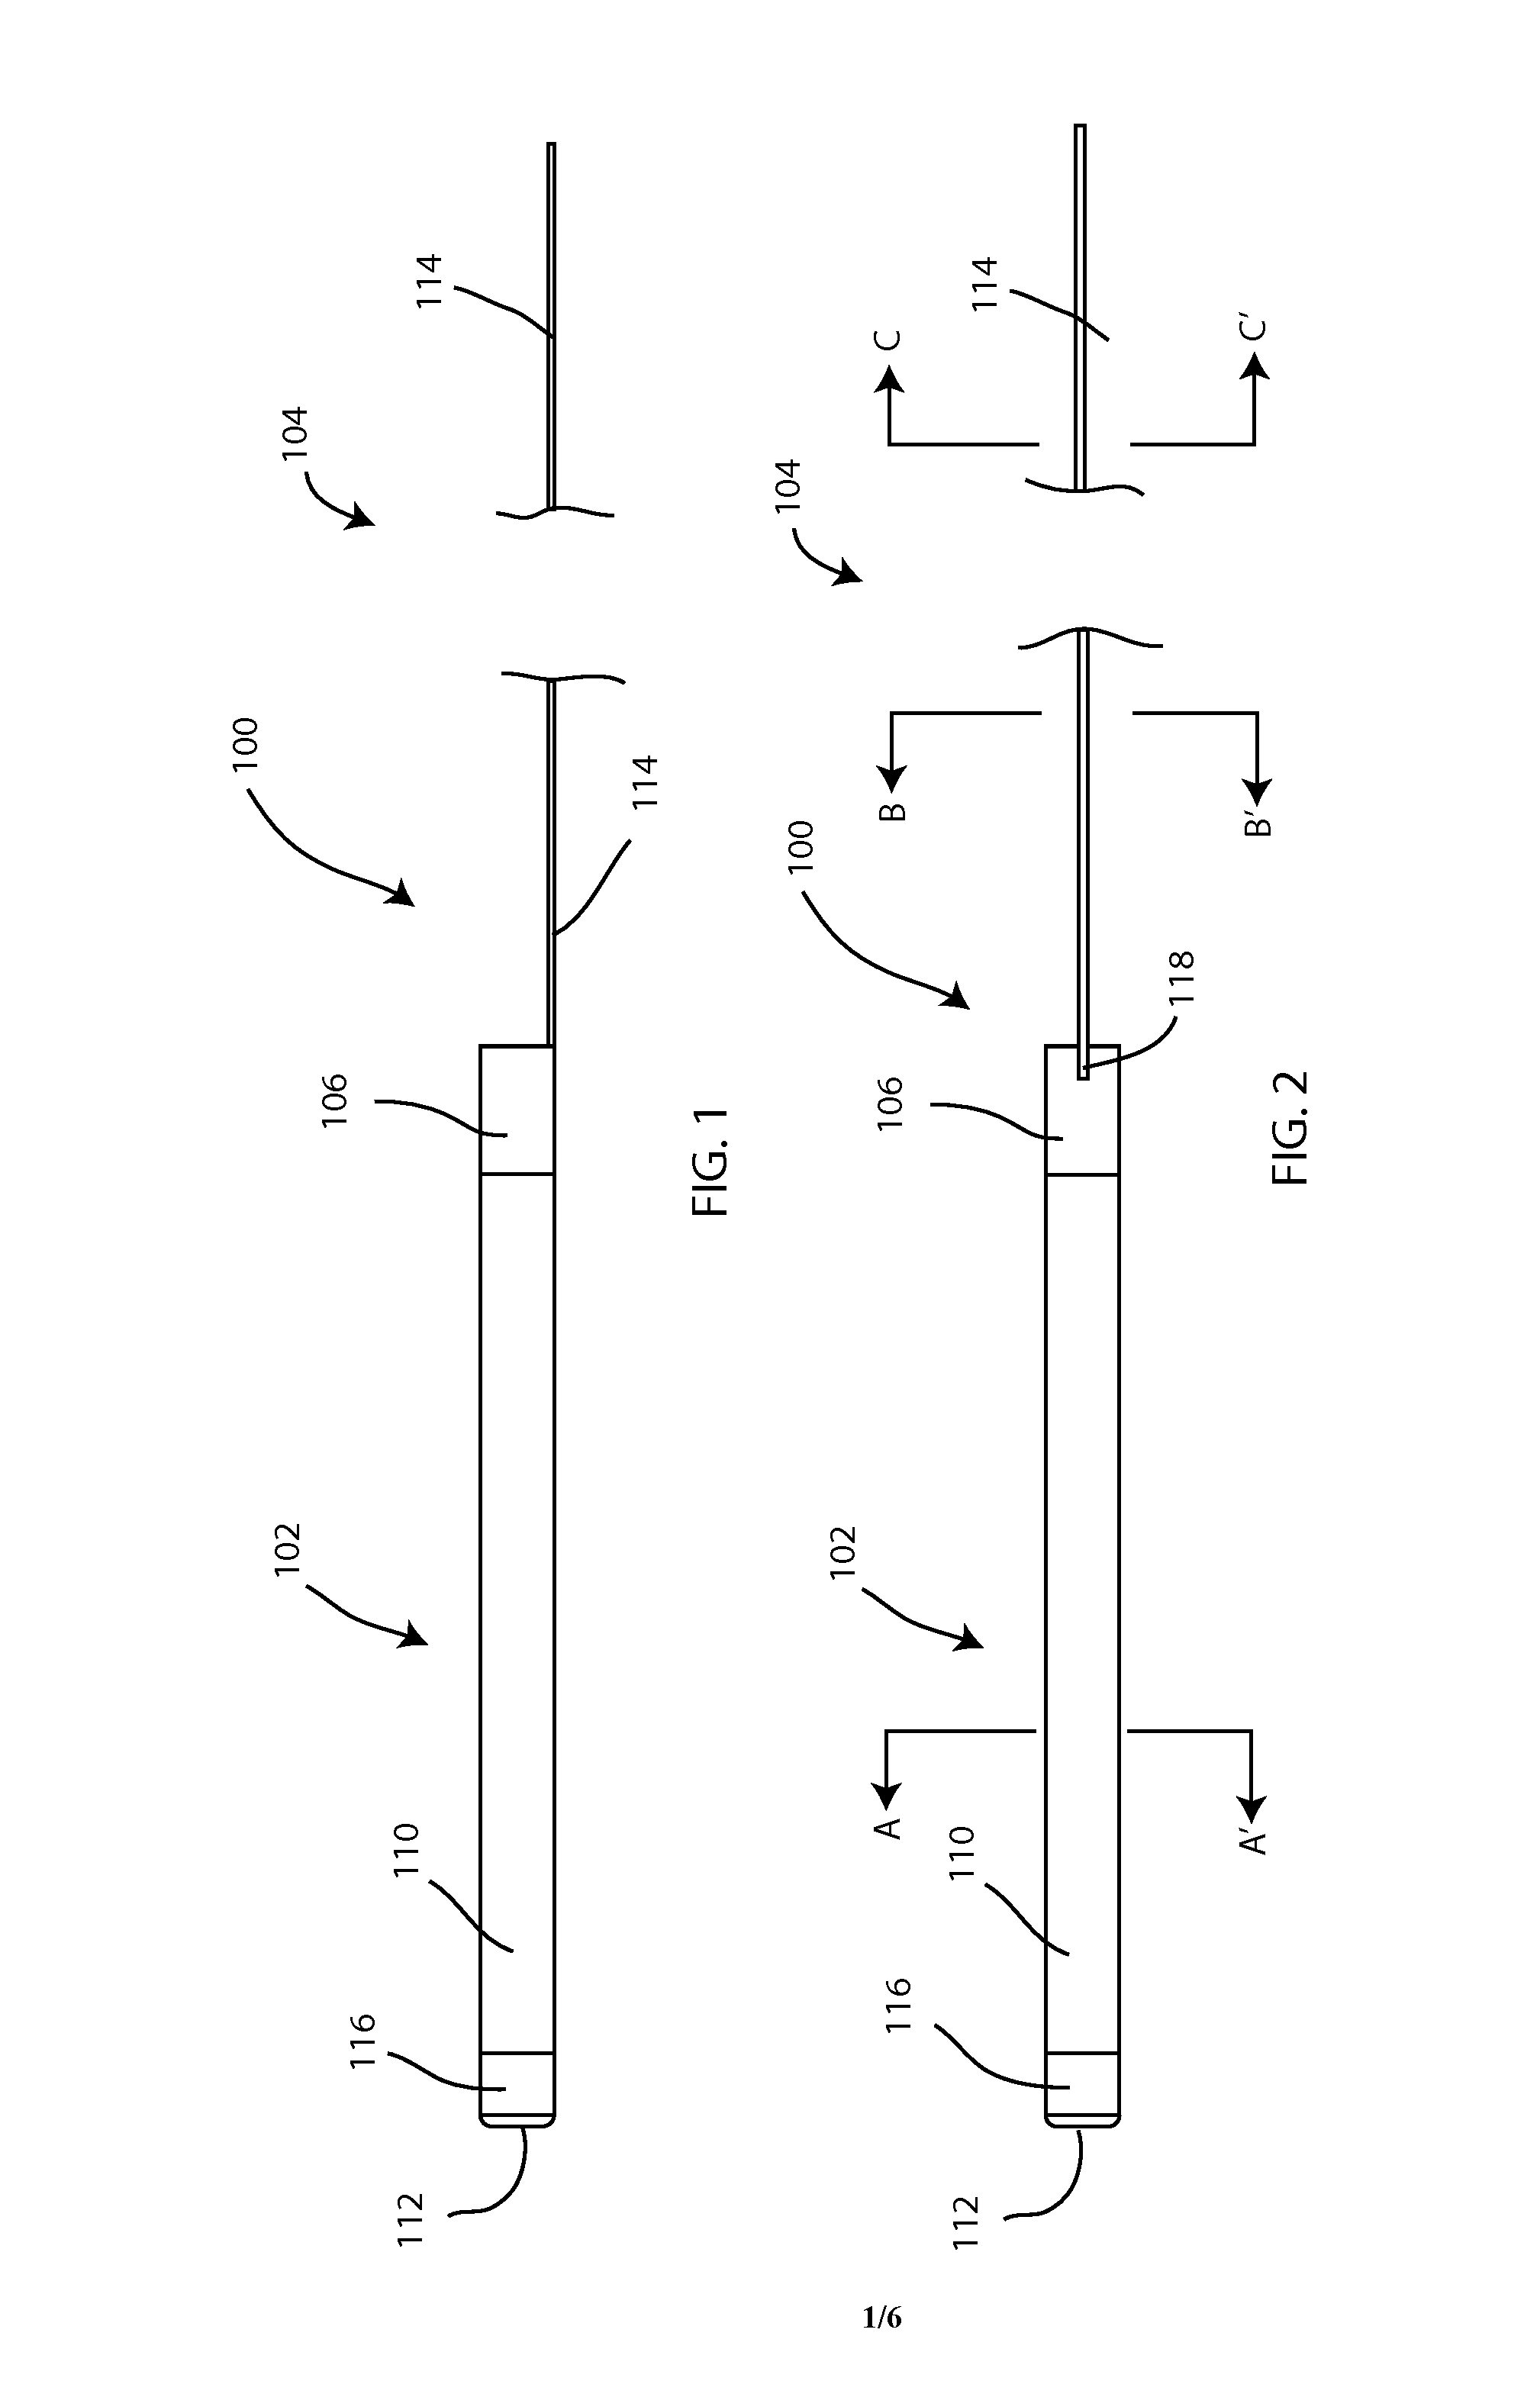 Coaxial guide coil for interventional cardiology procedures